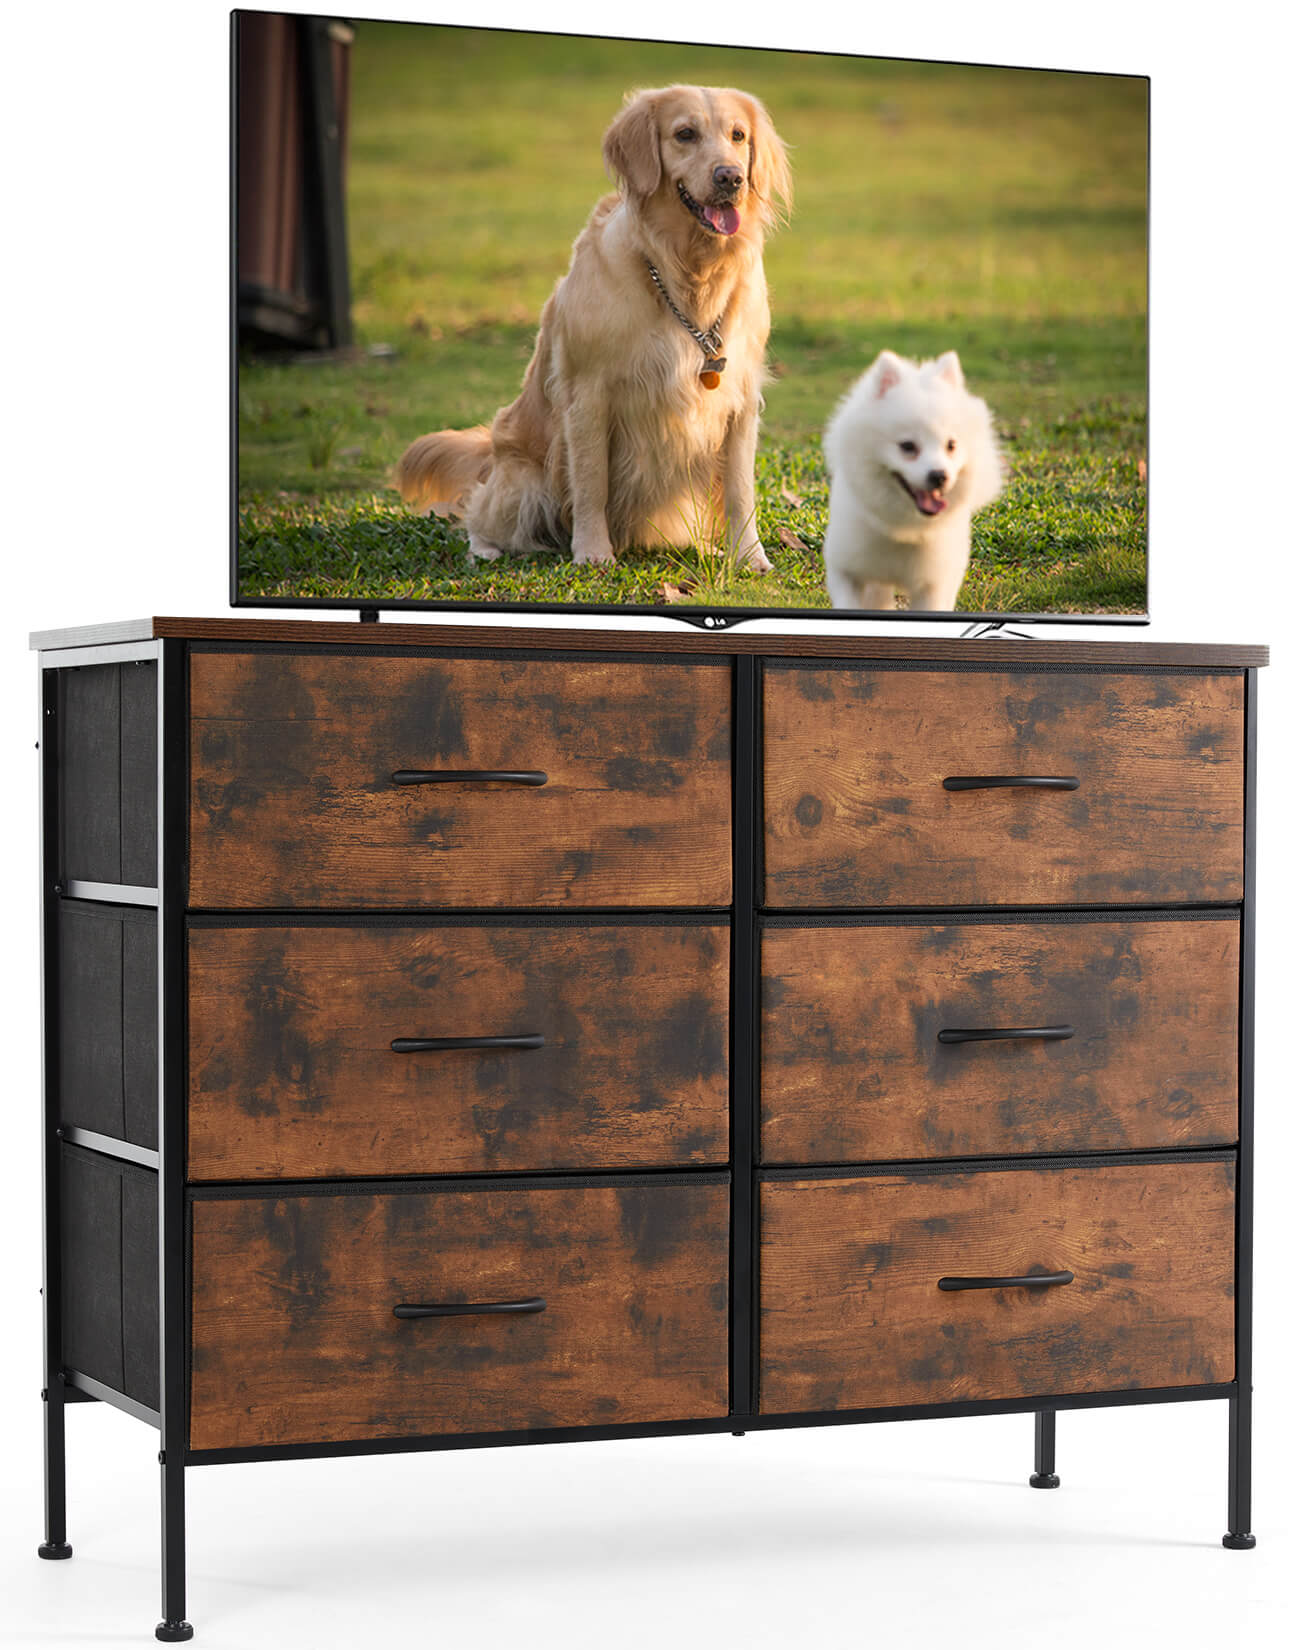 Dresser TV Stand, Console Table with 6 Wide Drawers, Entertainment Center for 55" TV Storage Fabric Dresser Drawer